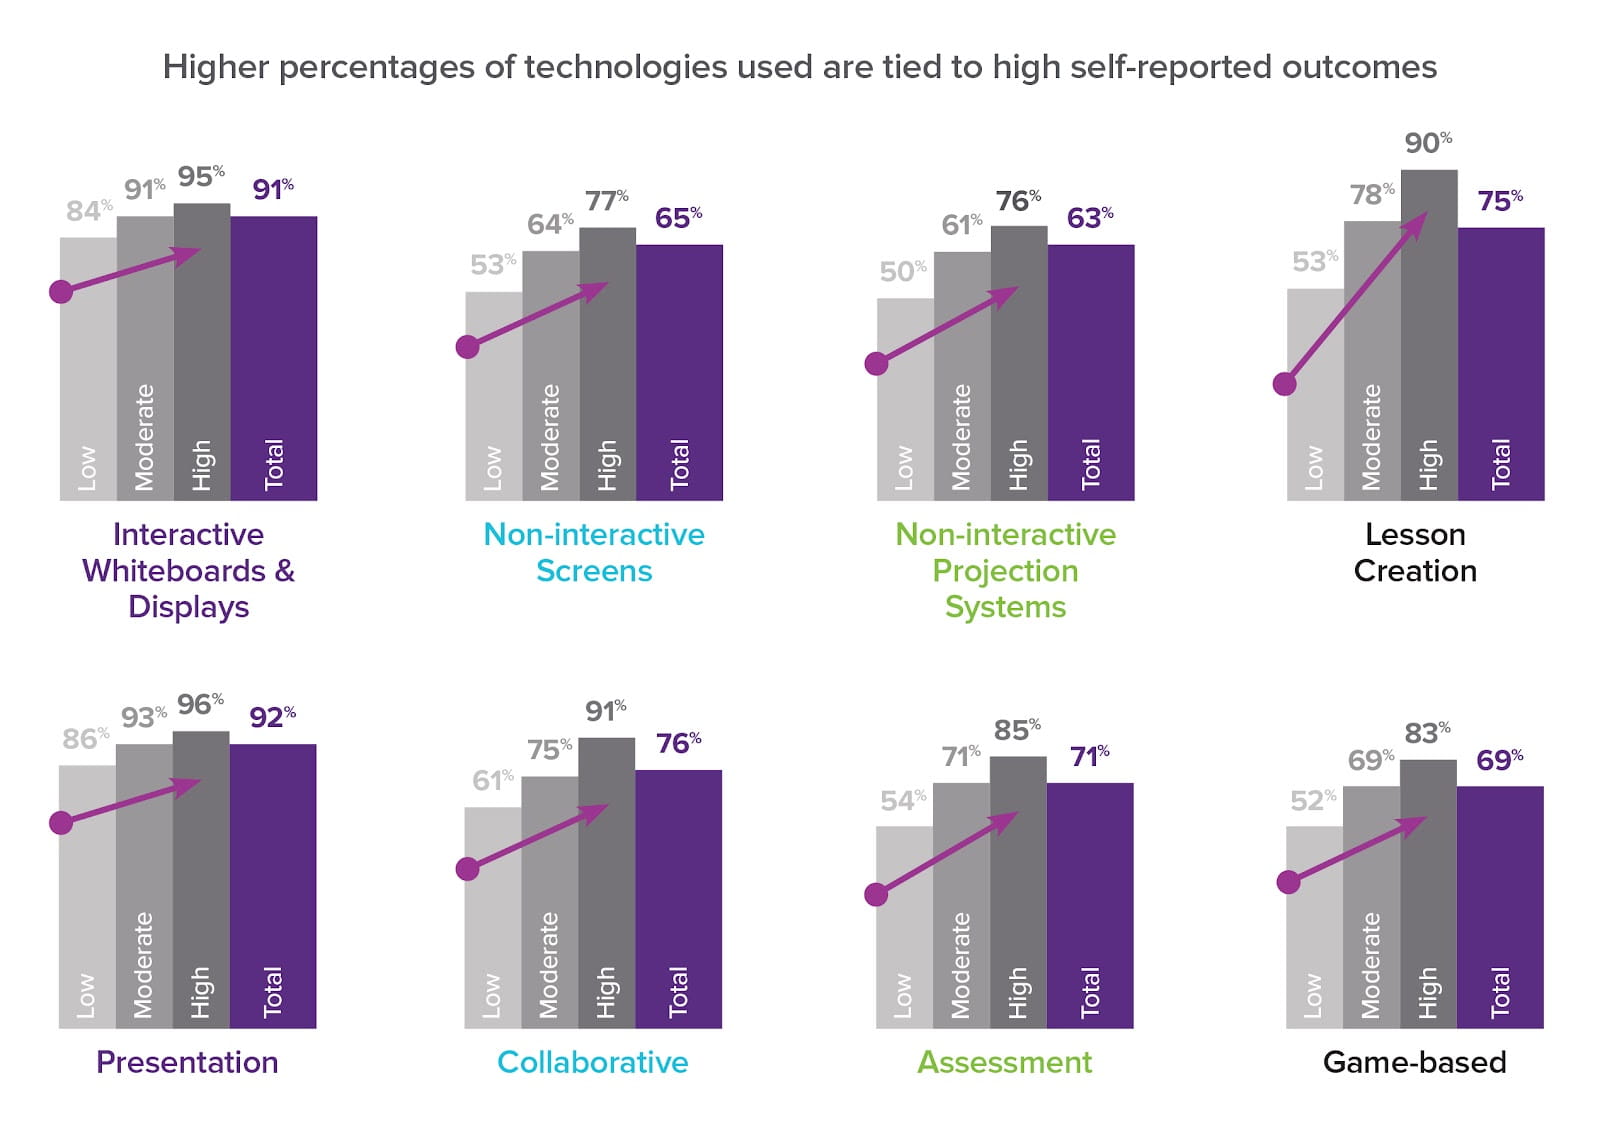 Higher percentages of technologies used are tied to high self-reported outcomes